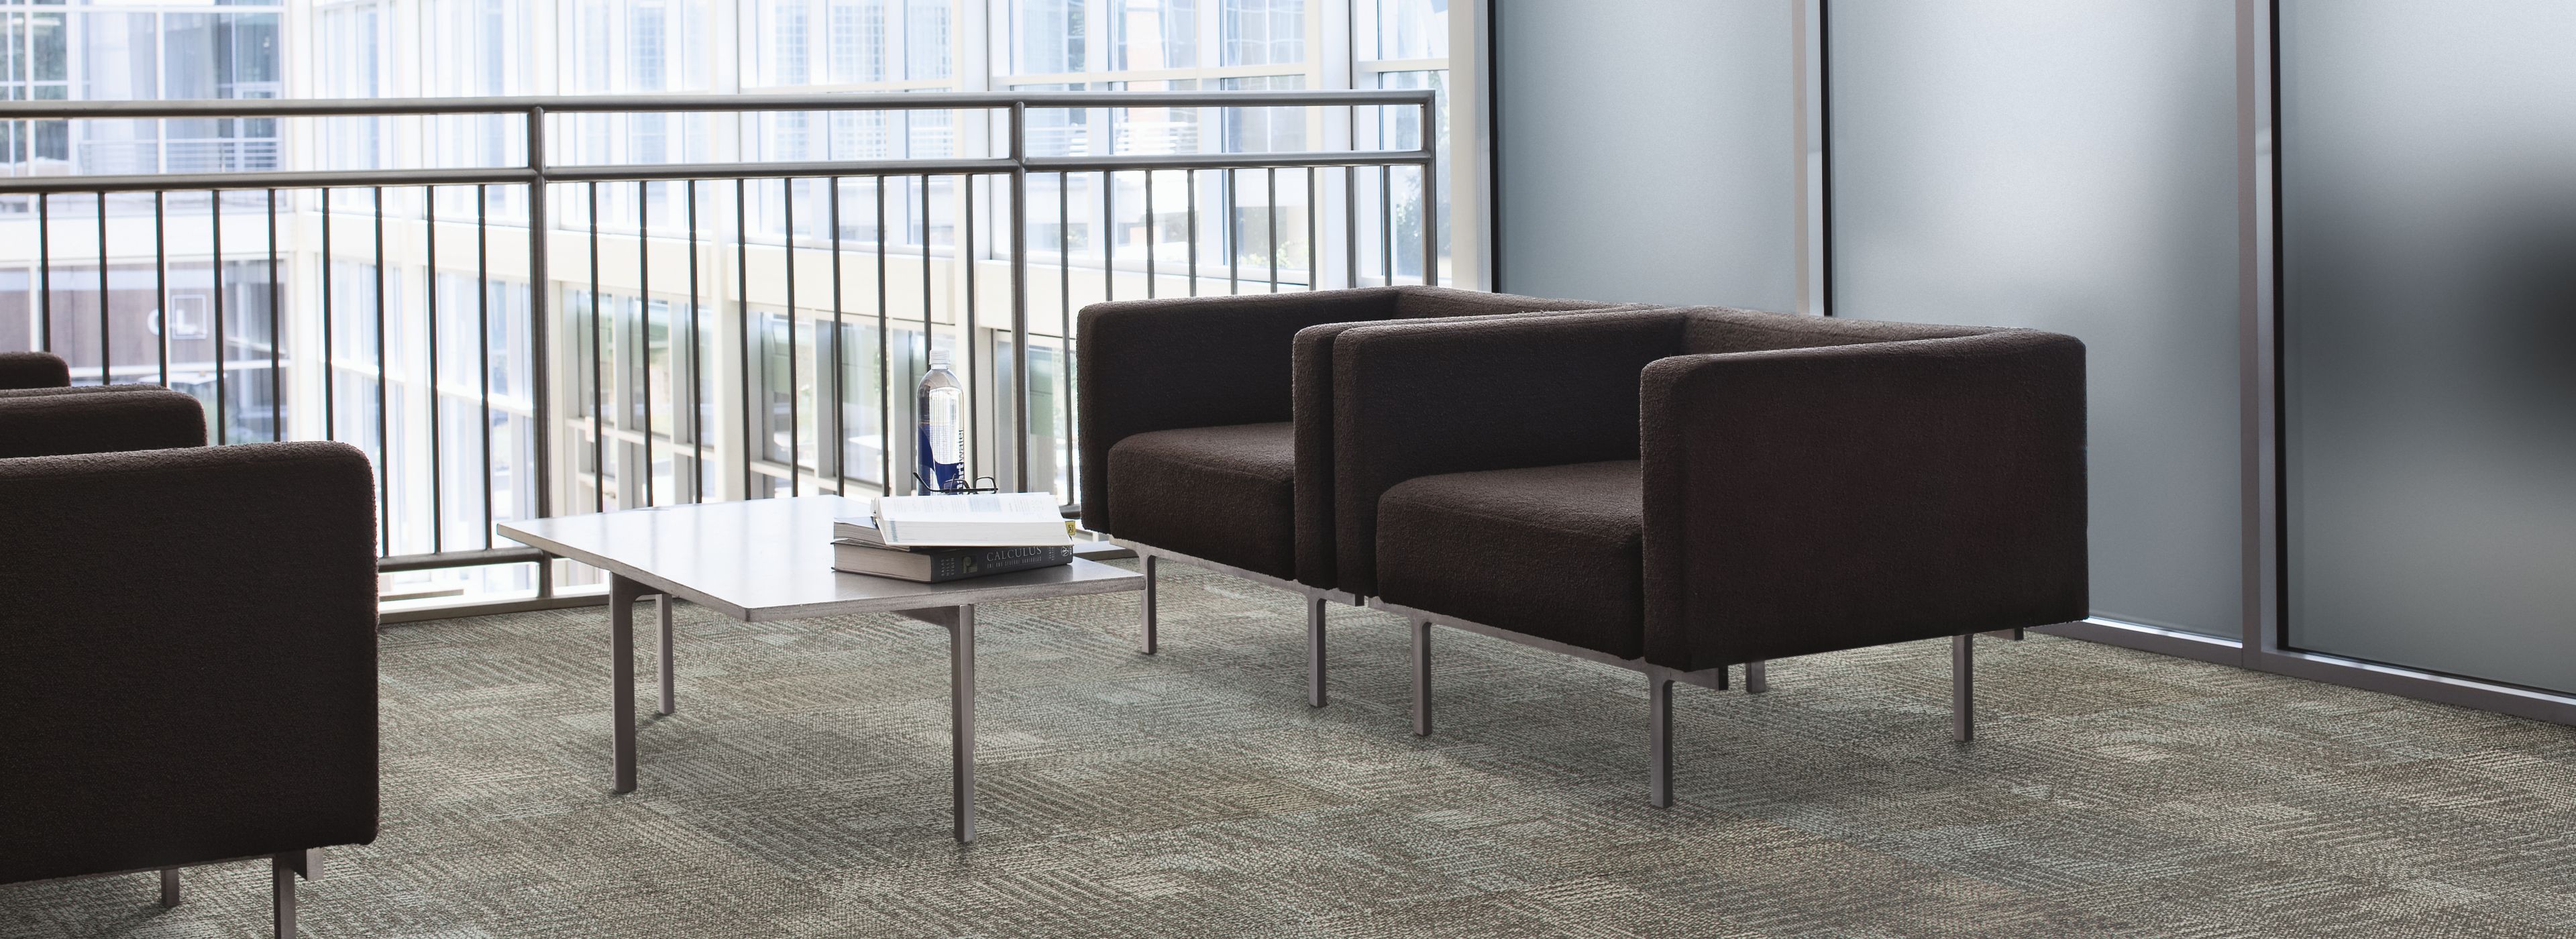 Interface Work carpet tile in lobby setting with couch and chairs image number 1